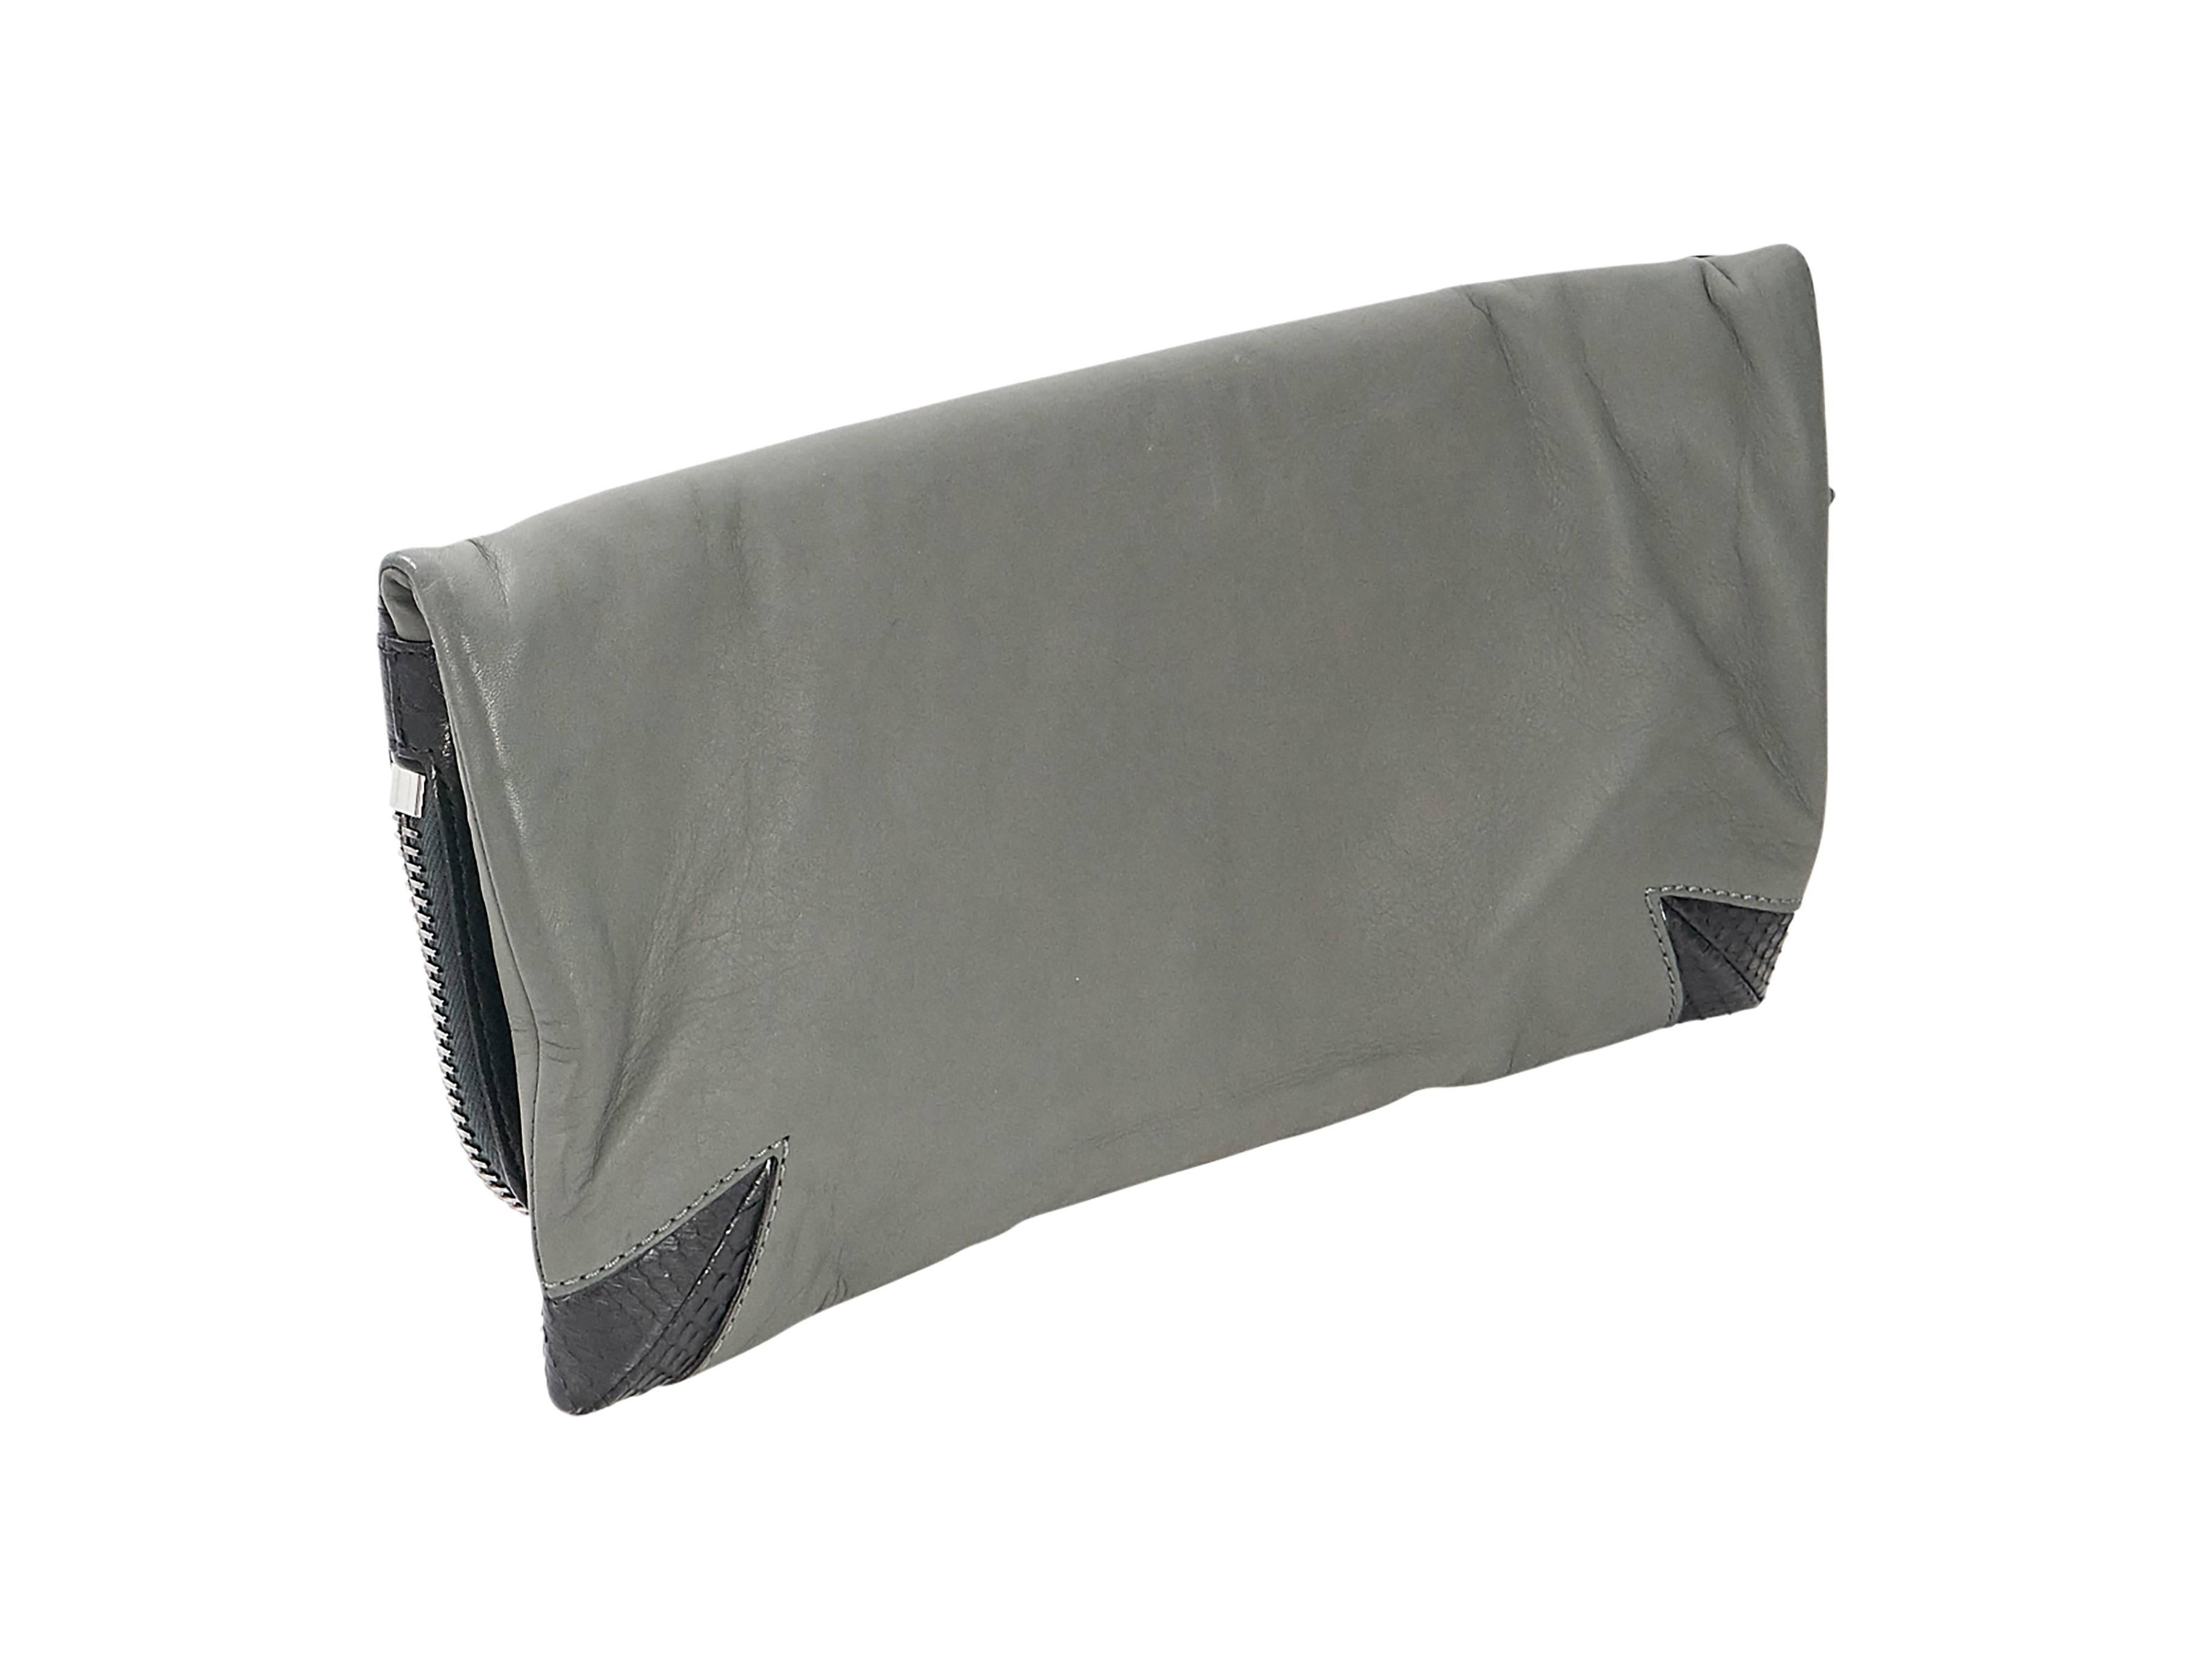 Product details:  Black and grey leather foldover clutch by Devi Kroell.  Front flap with zip closure.  Zip pocket over front flap.  Lined interior with inner zip pocket.  Silvertone hardware.  15